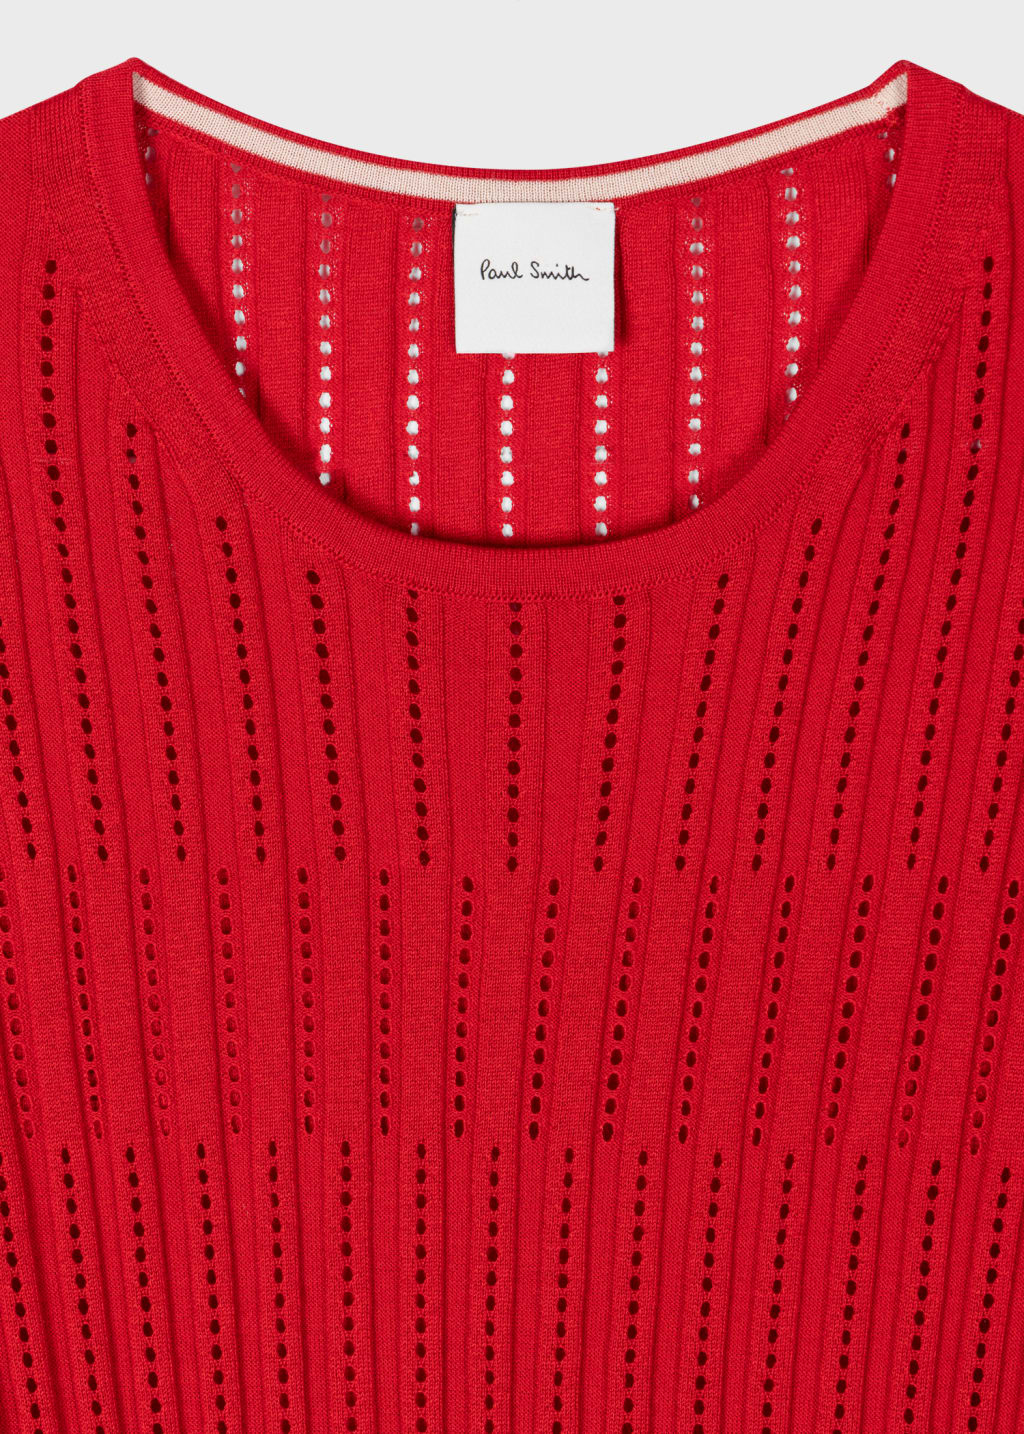 Detail View - Women's Red Knitted Long Sleeve Top Paul Smith